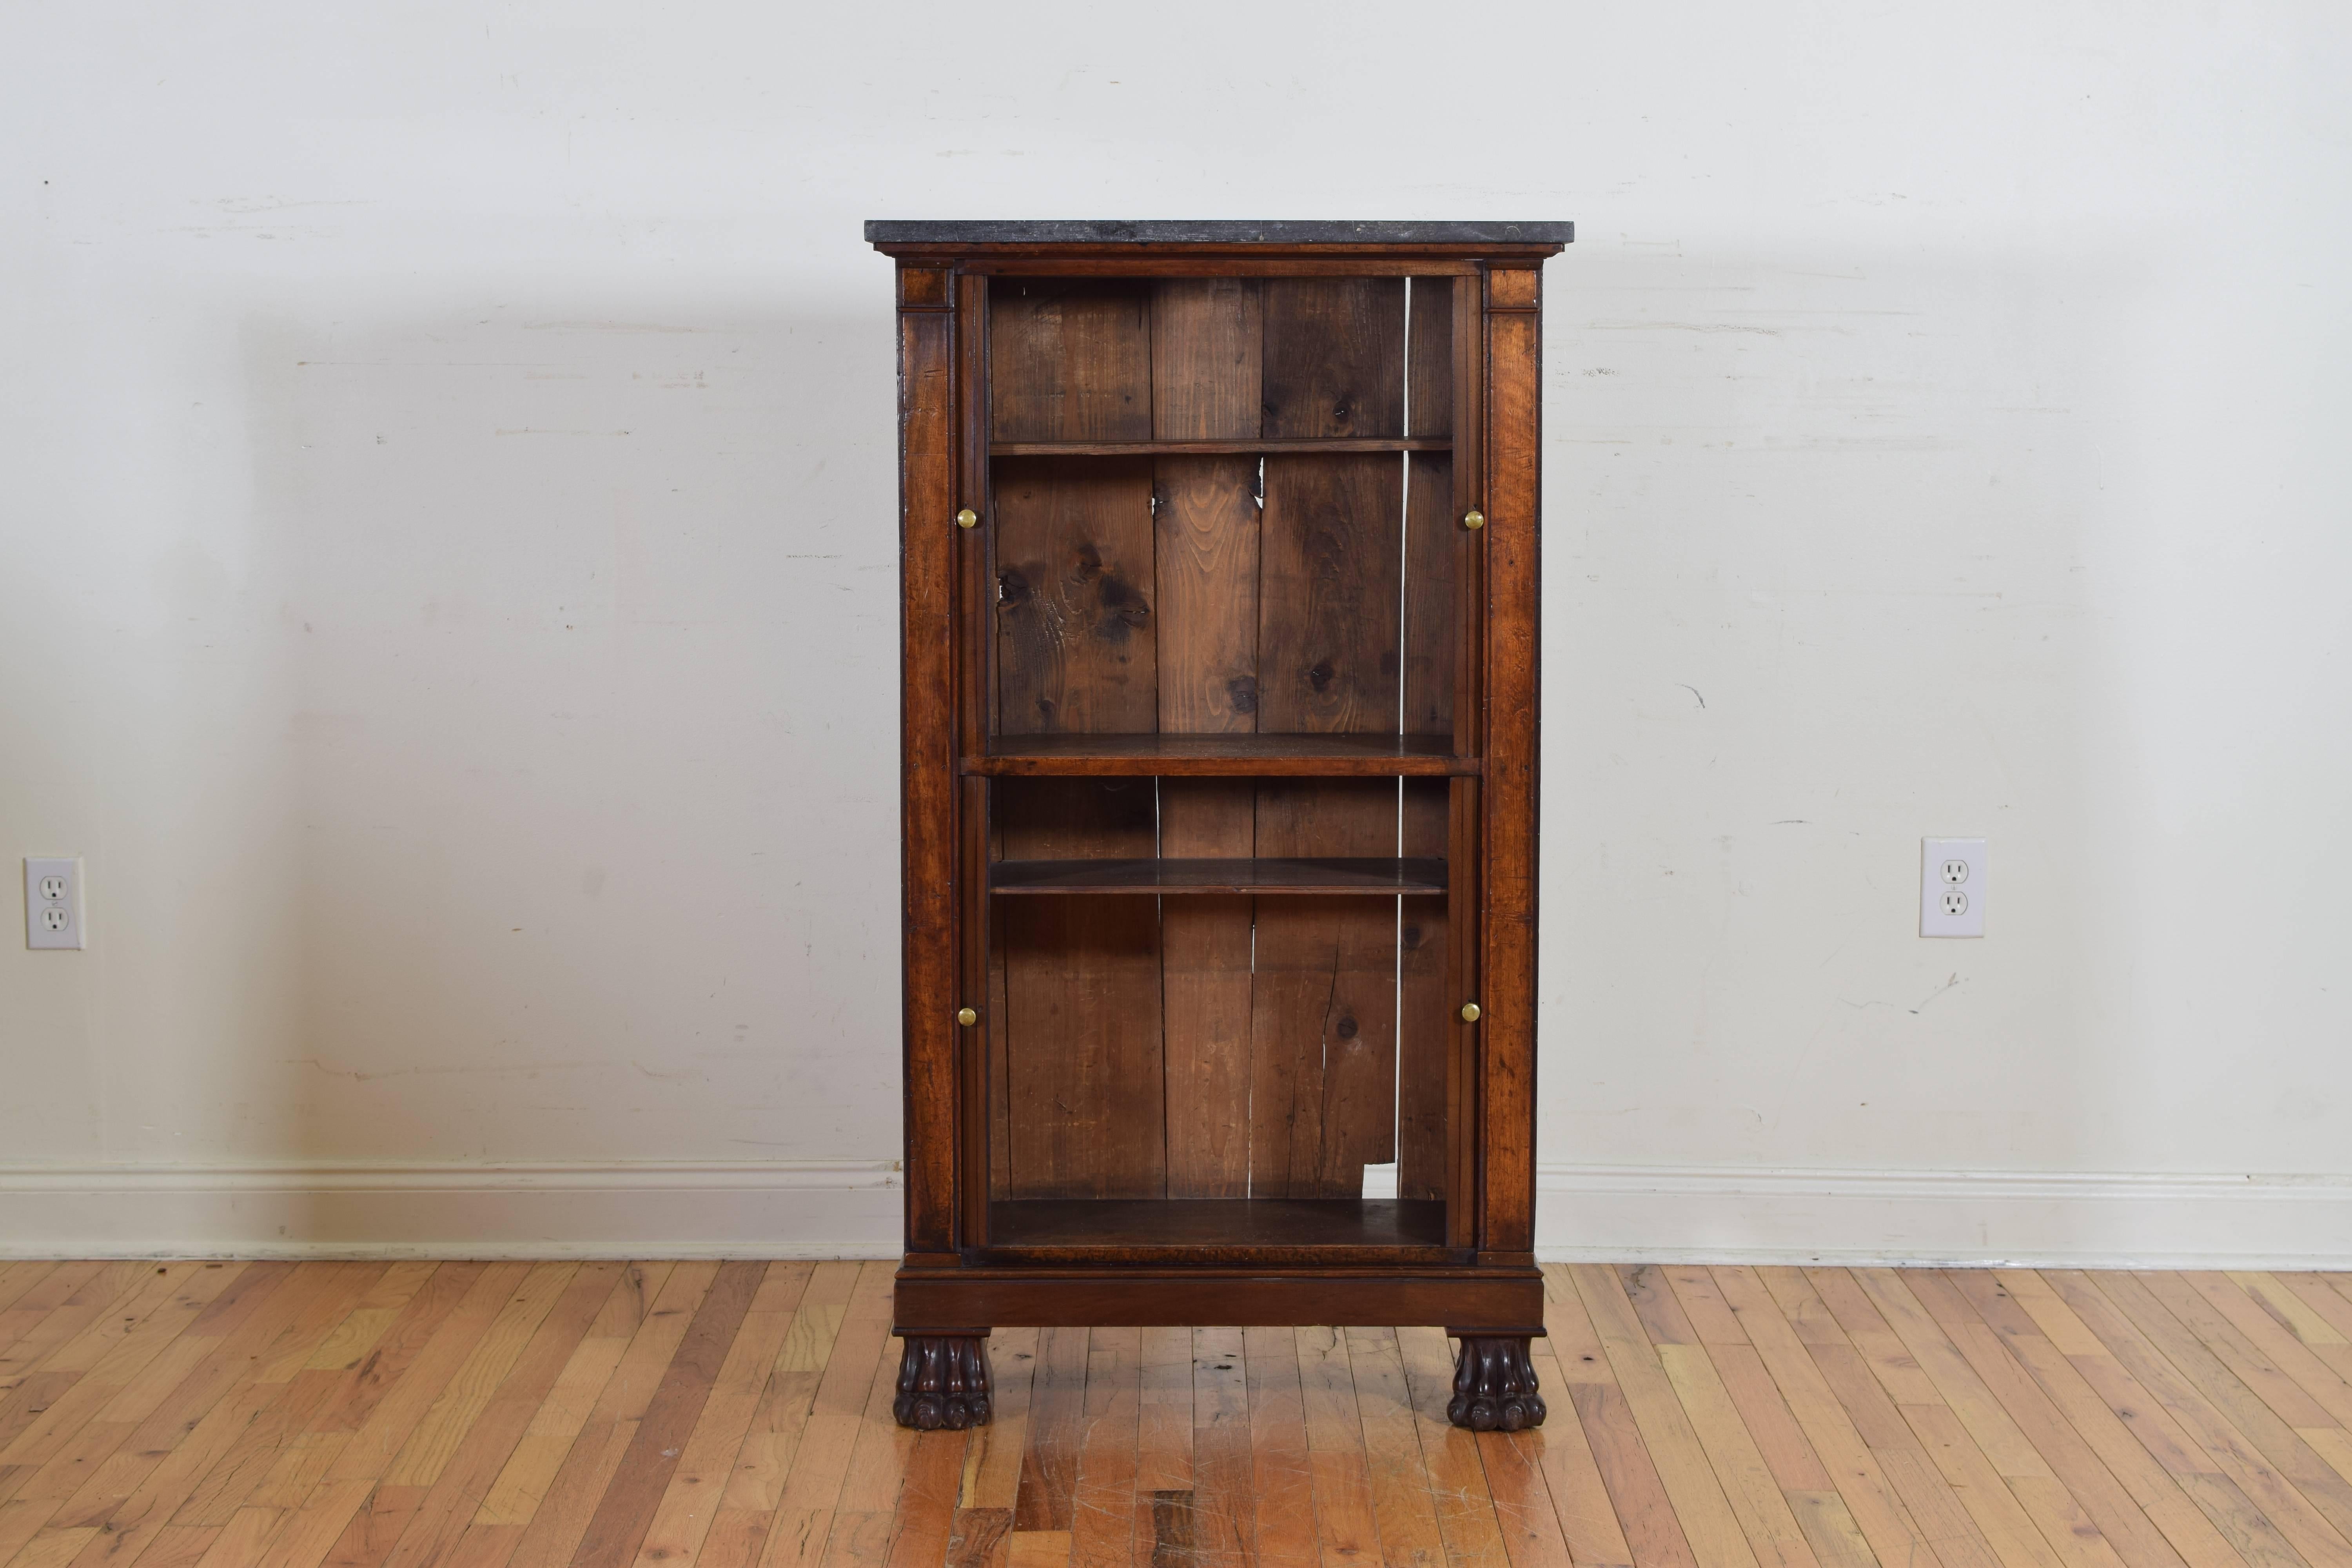 Walnut French Empire Revival Mahogany Cabinet, Tambour Doors and Marble Top